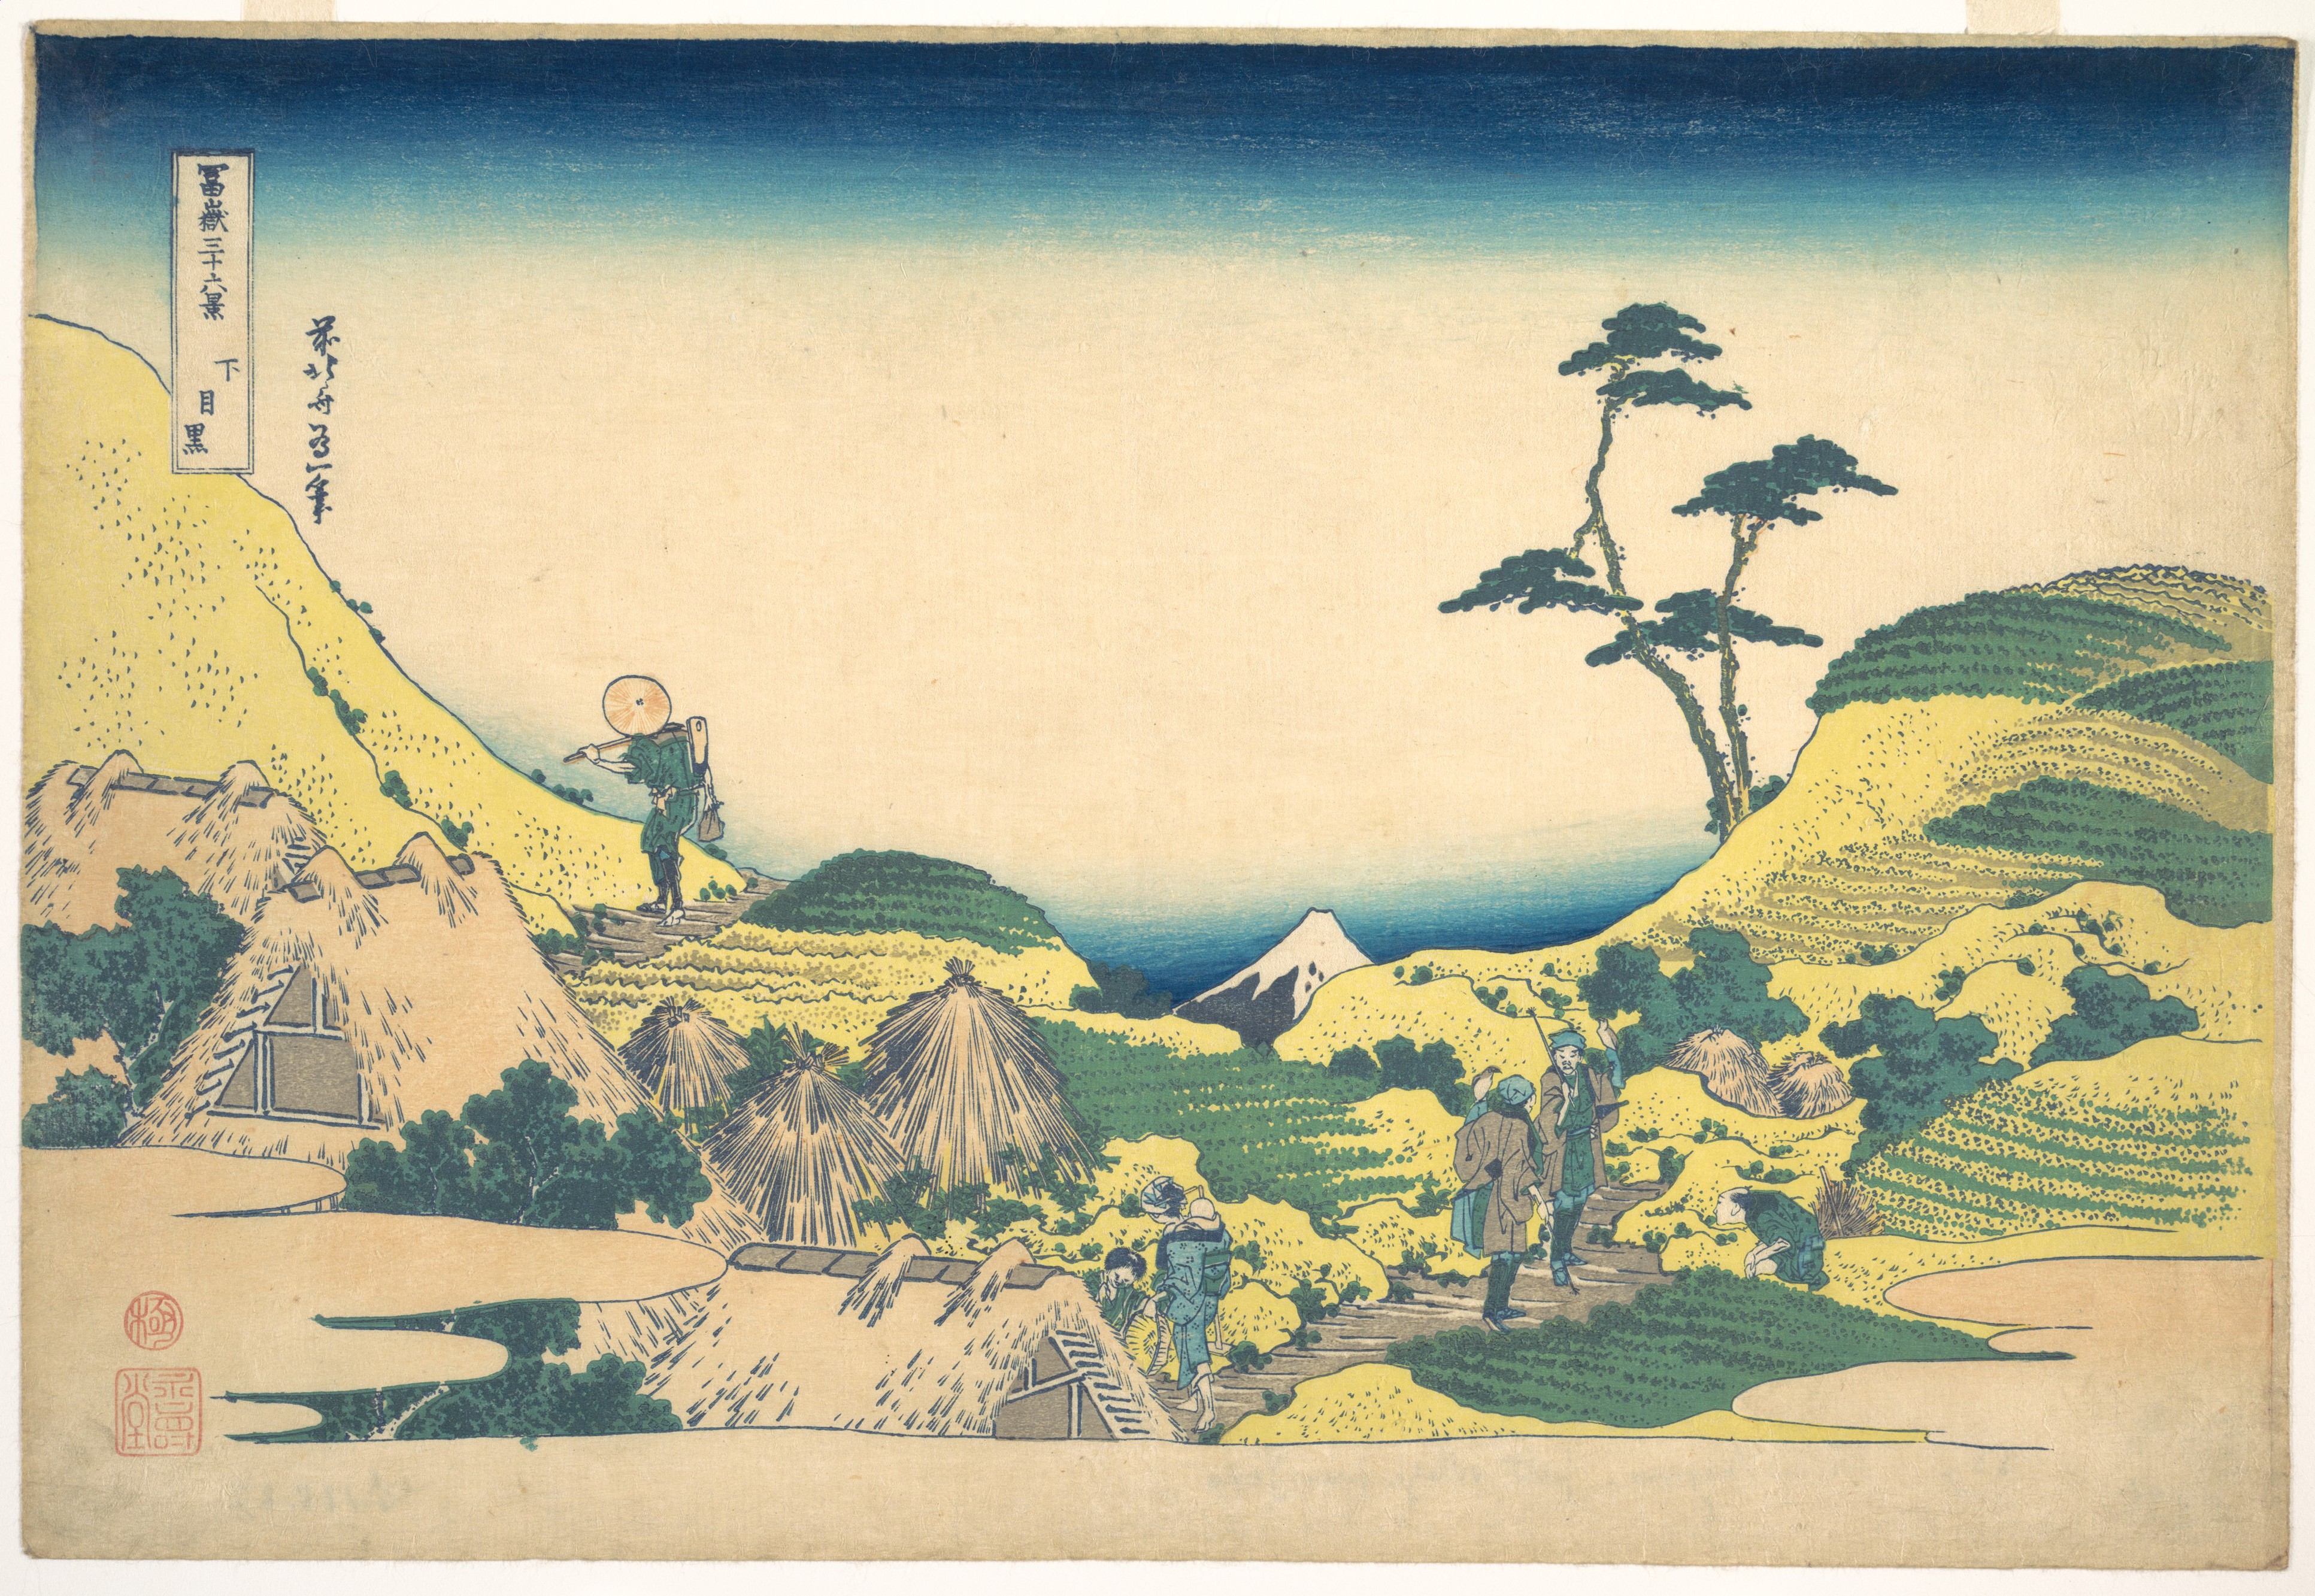 Lower Meguro (Shimo Meguro), from the series Thirty-six Views of Mount Fuji